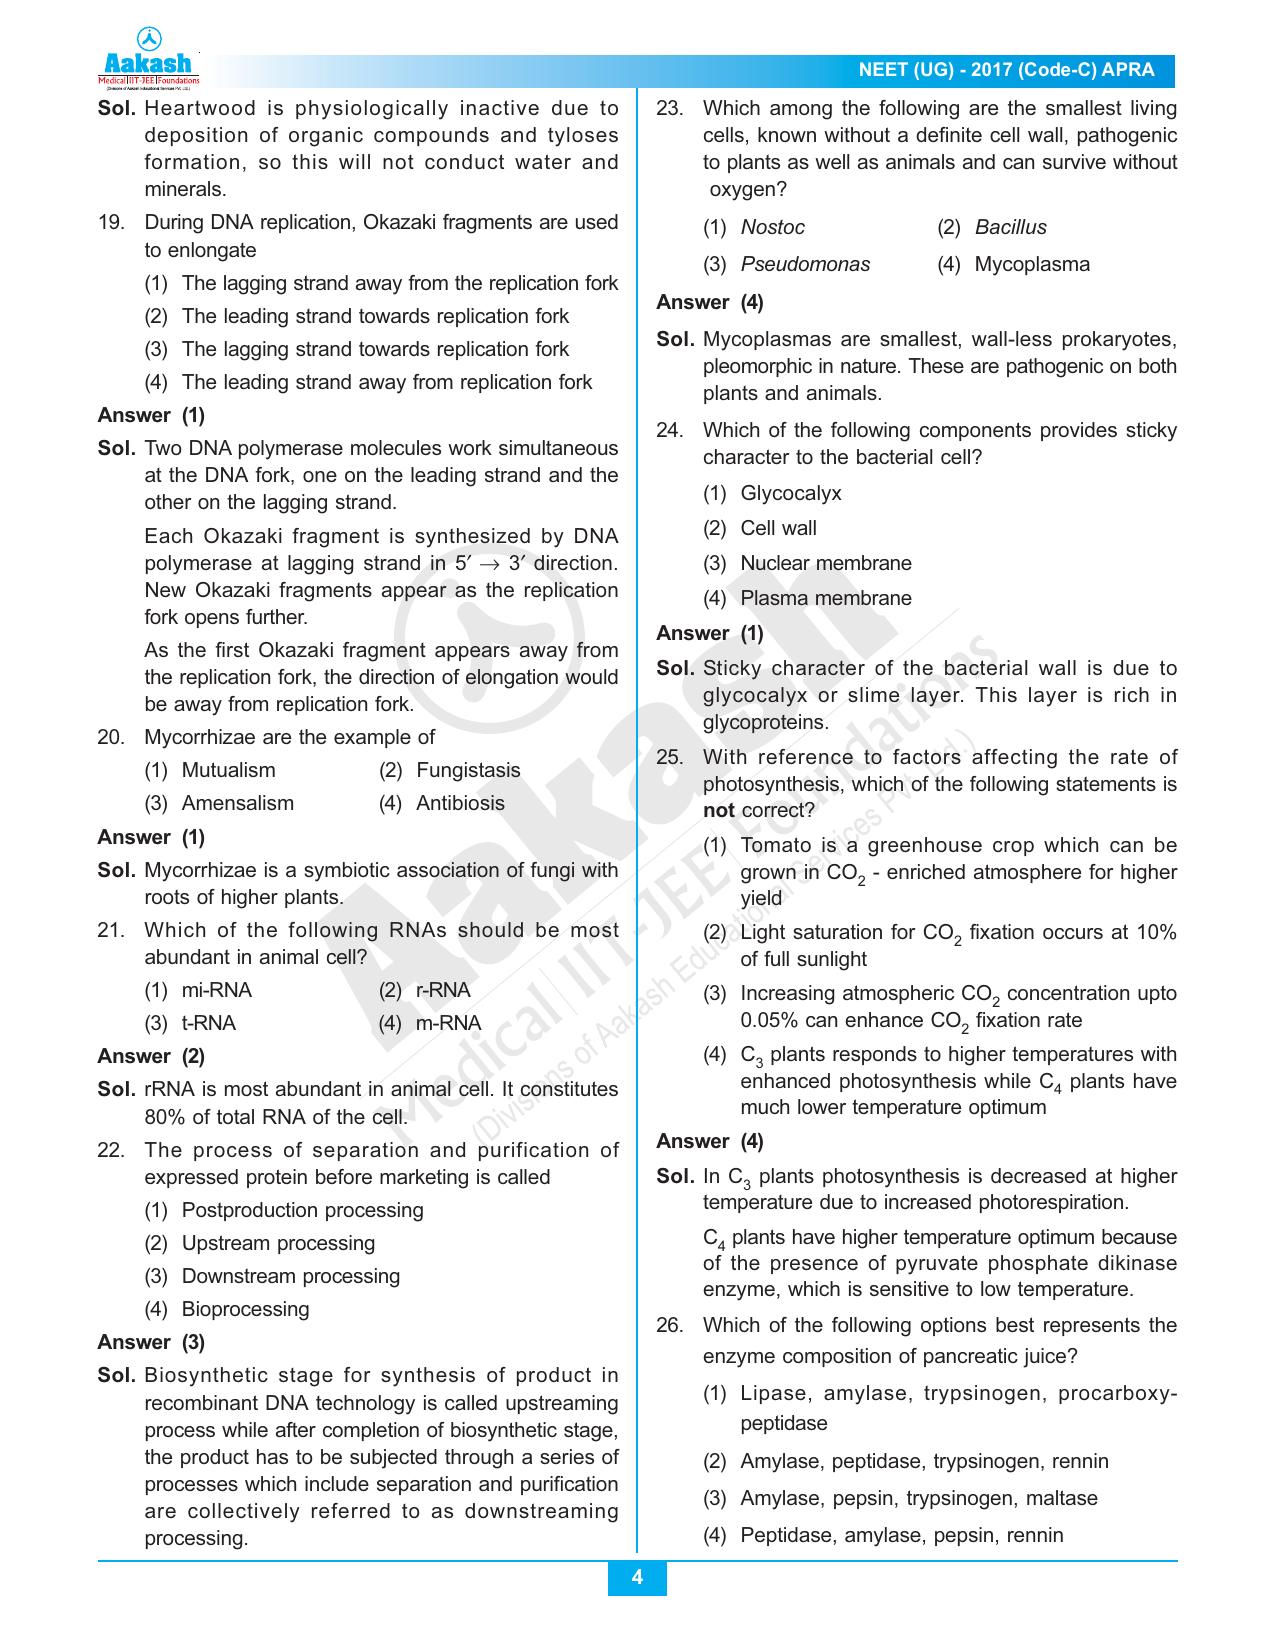  NEET Code C 2017 Answer & Solutions - Page 4